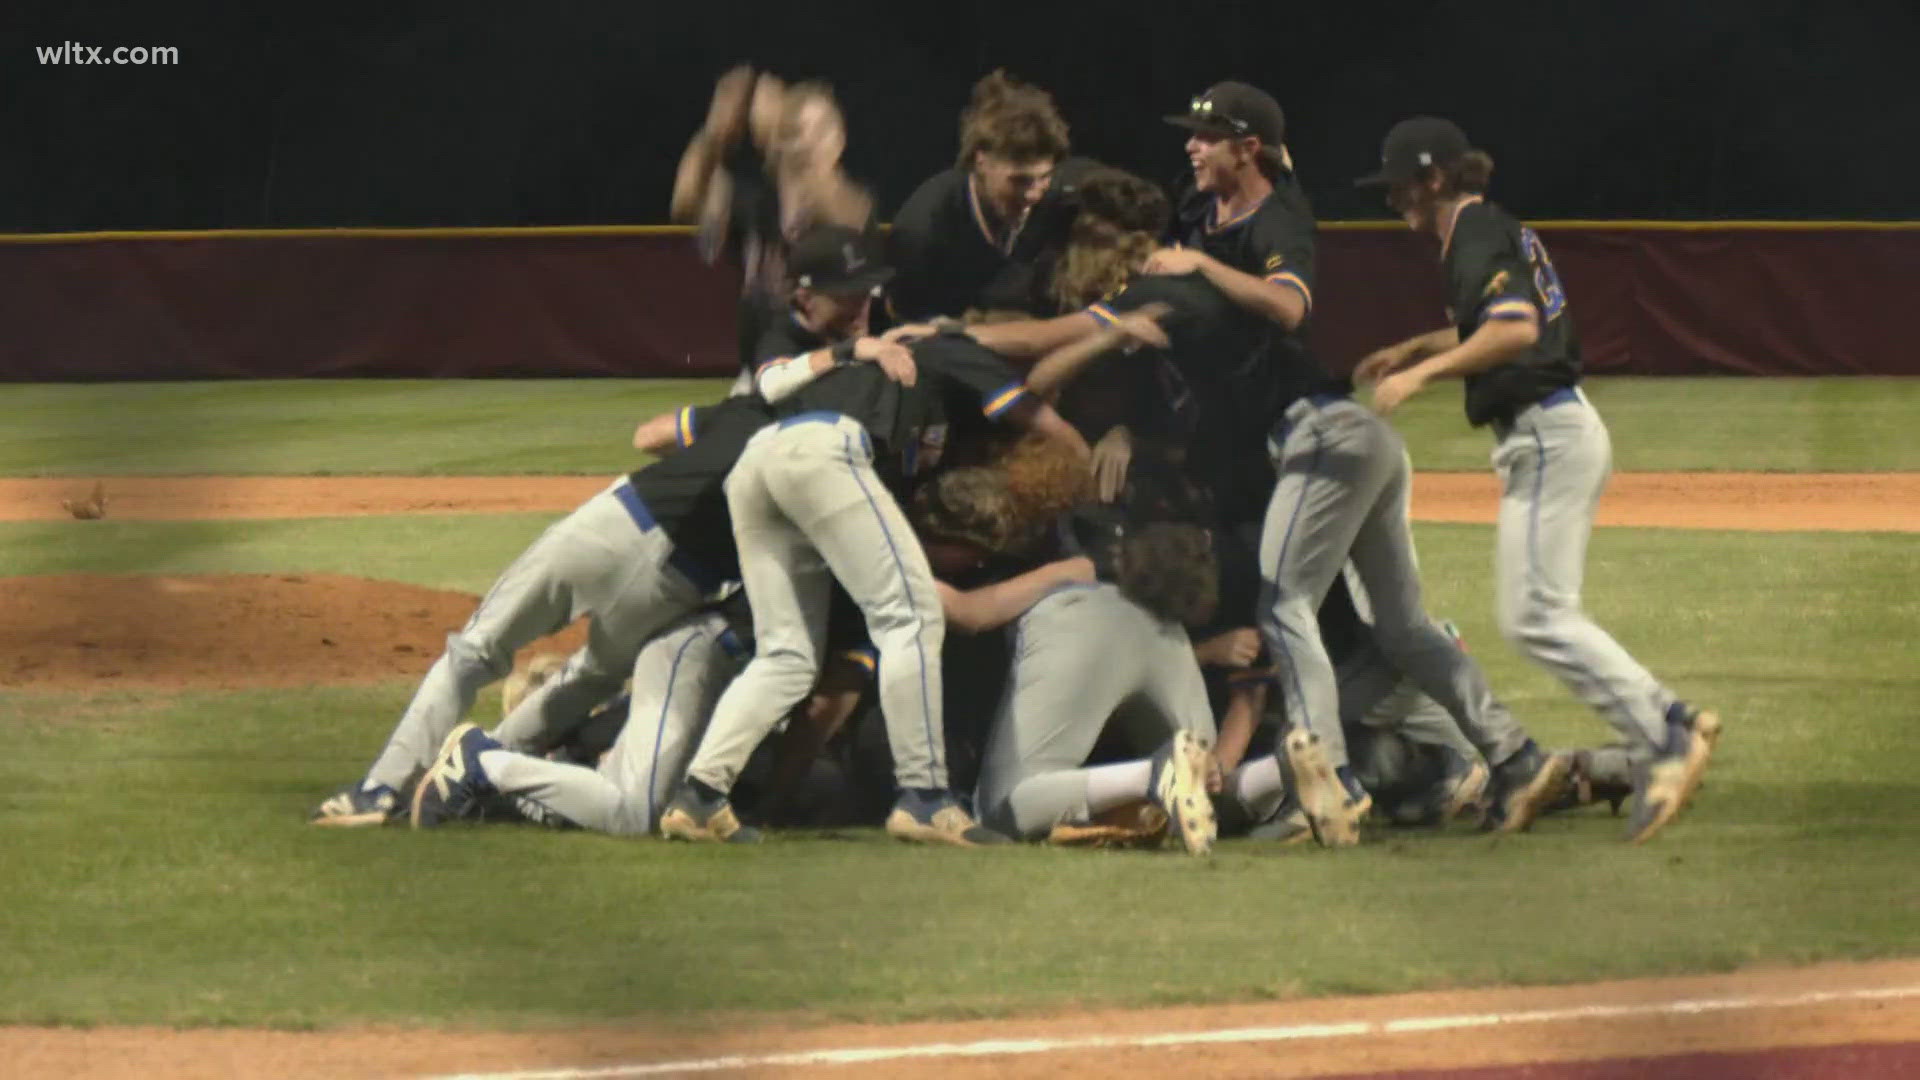 Lexington clinches the 5A state championship with a 3-1 win at Ashley Ridge. Highlights followed by comments from Brian Hucks and Brandon Cromer.